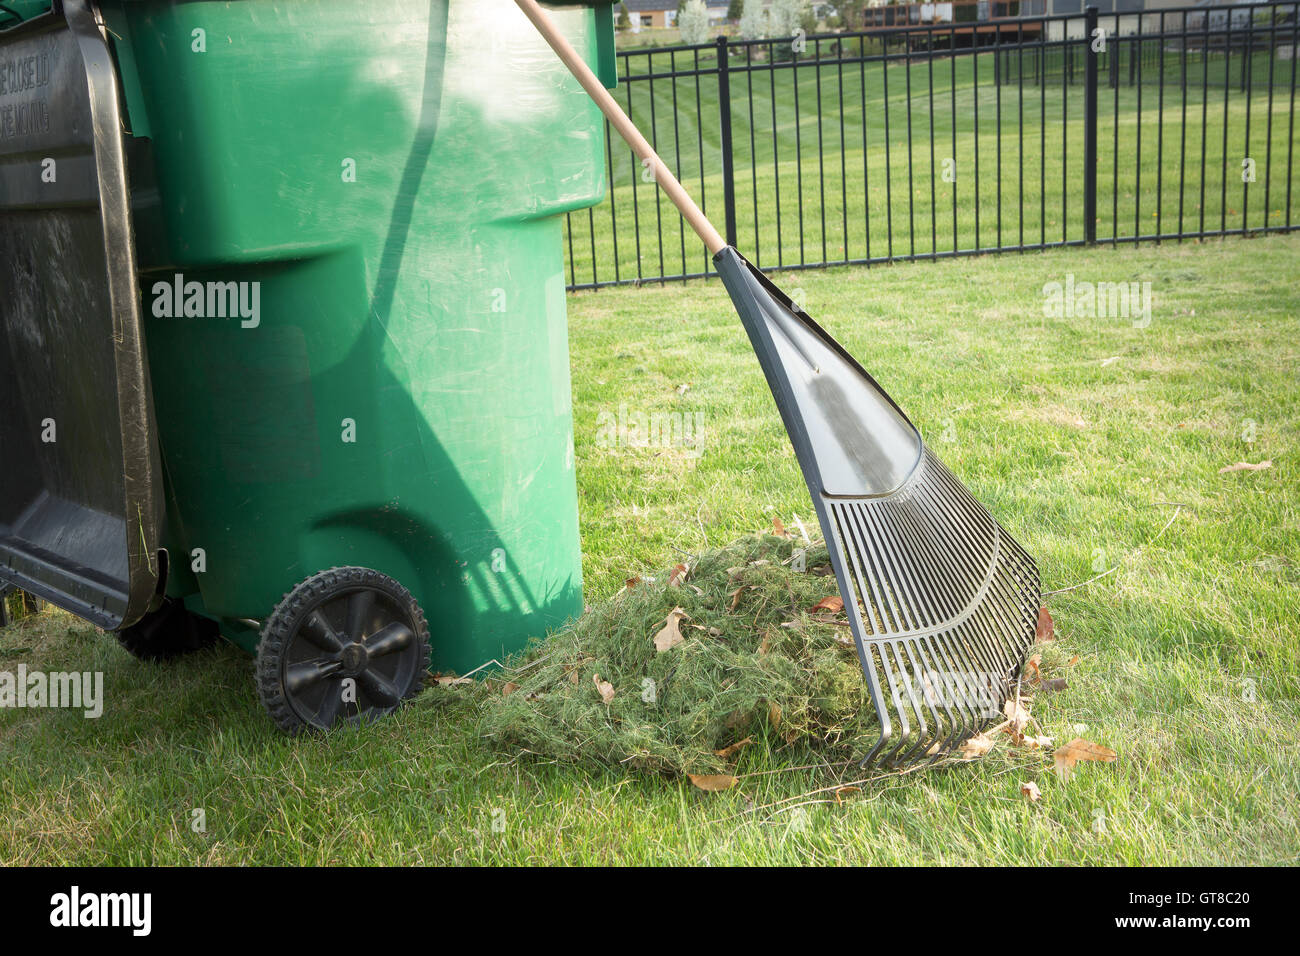 Raking up grass cuttings in spring during yard maintenance with a heap of clippings and a tined rake standing on a neatly manicu Stock Photo